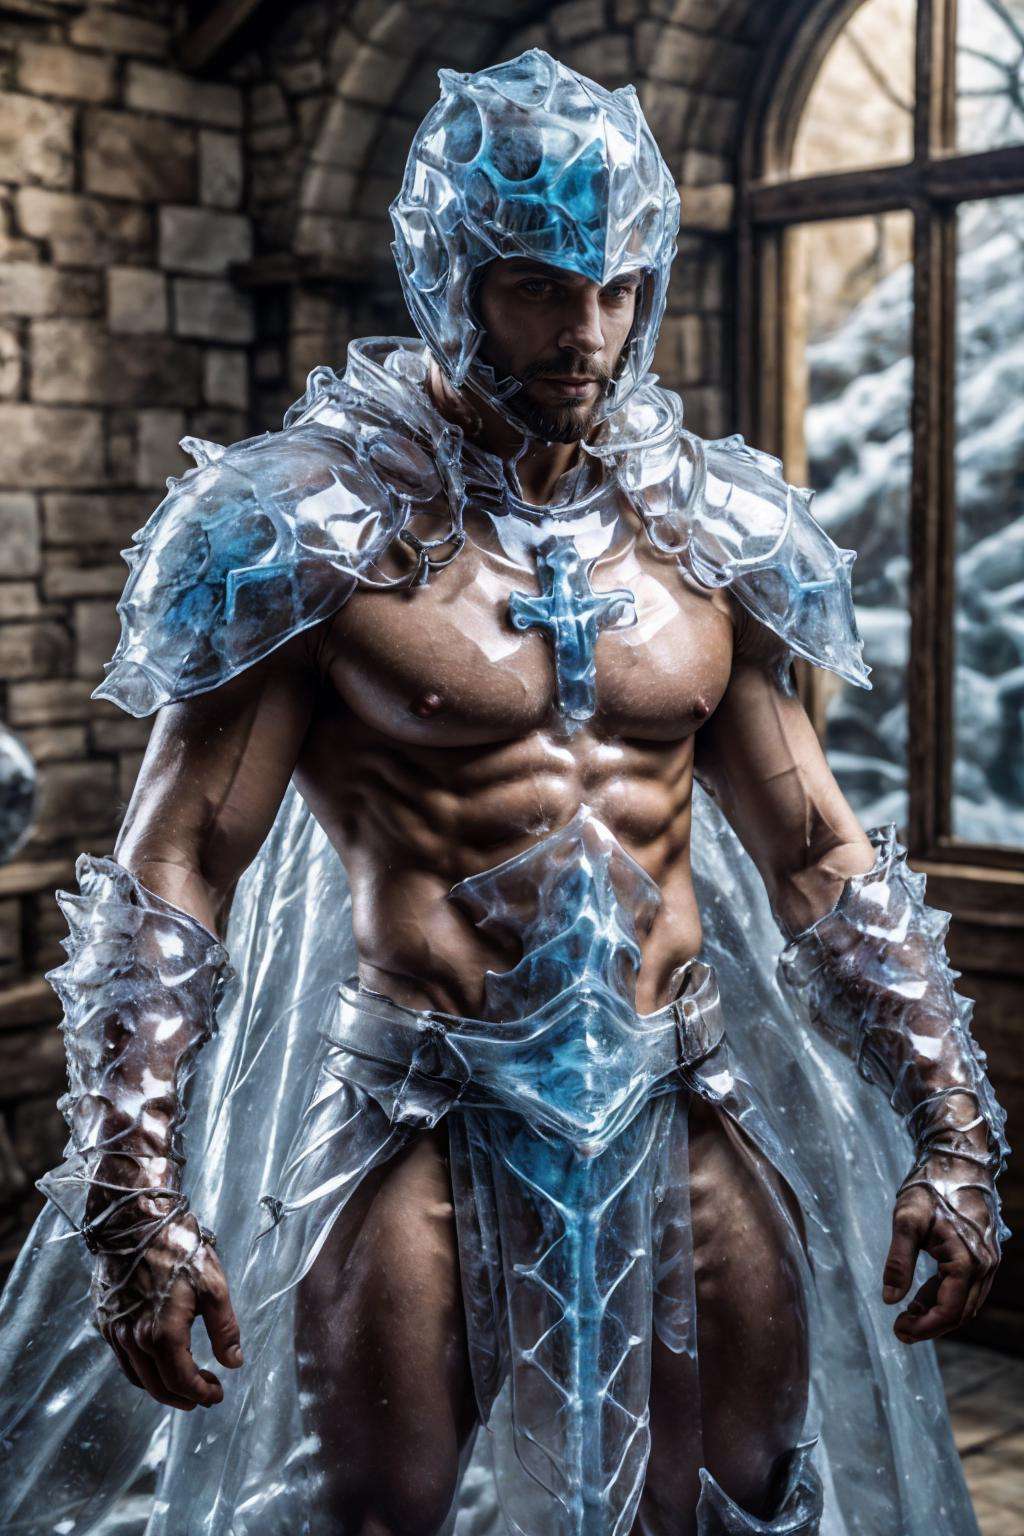 ic34rmor, wearing ice paladin armor, ((fighting stance)), holding ice shield, medieval fantasy city background, indoors, helmet, cape, cross,, realistic, masterpiece, intricate details, detailed background, depth of field, photo of a man,